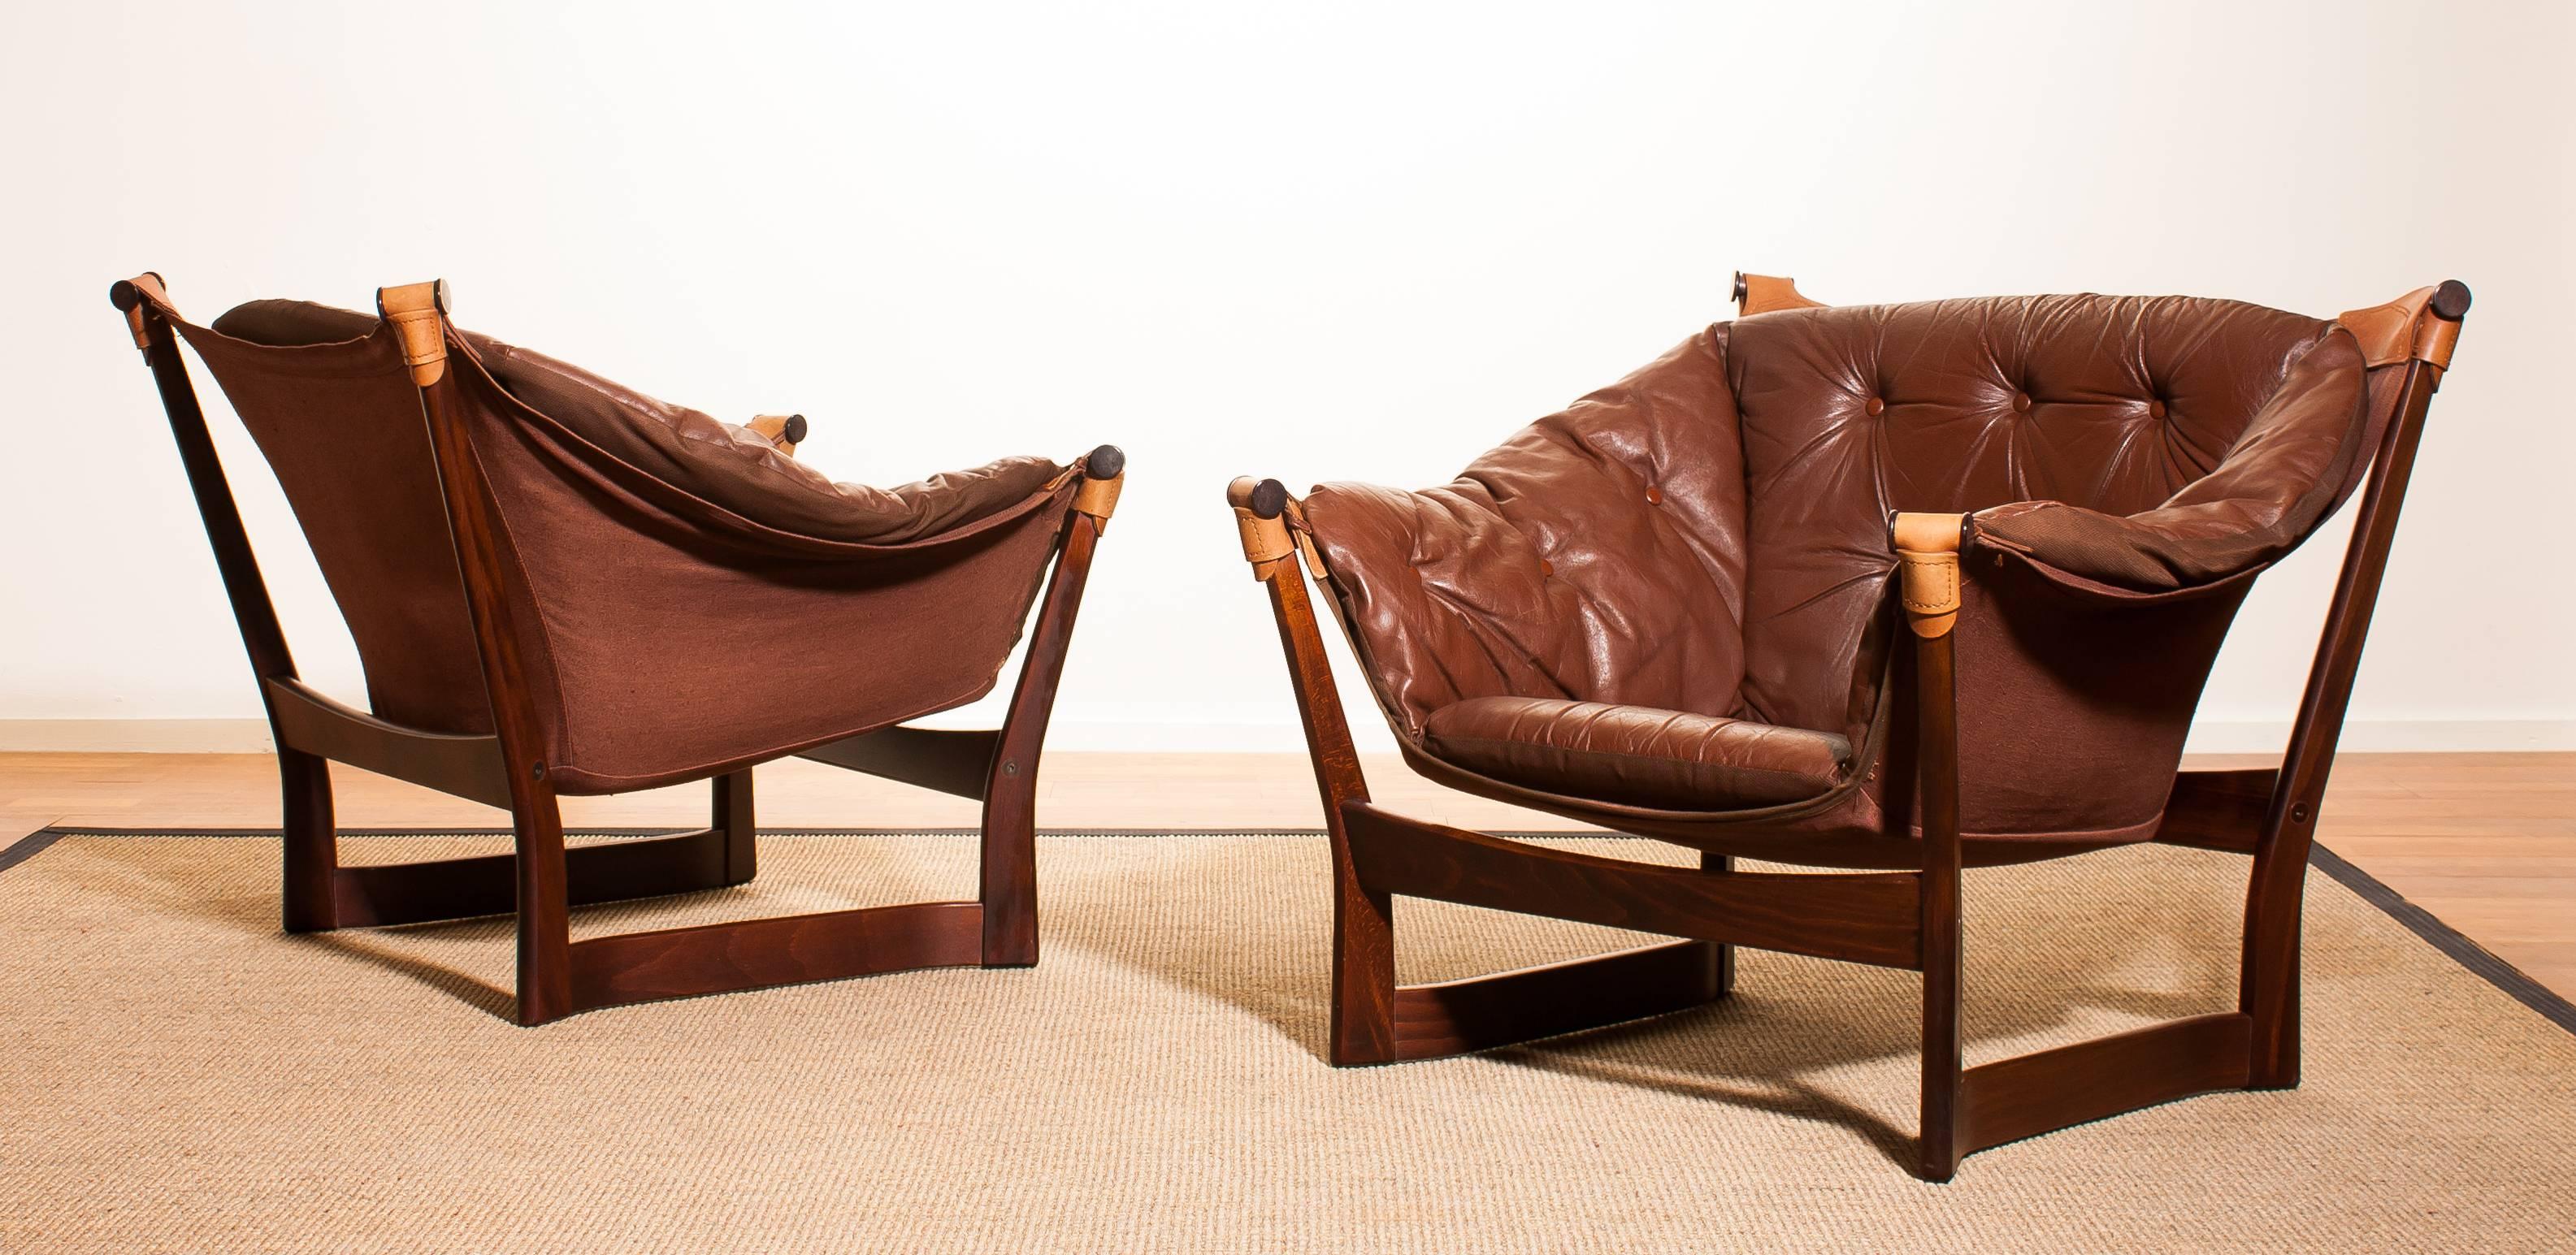 1950s, Teak and Leather Pair 'Trega' Chairs by Tormod Alnaes for Sørliemøbler 1